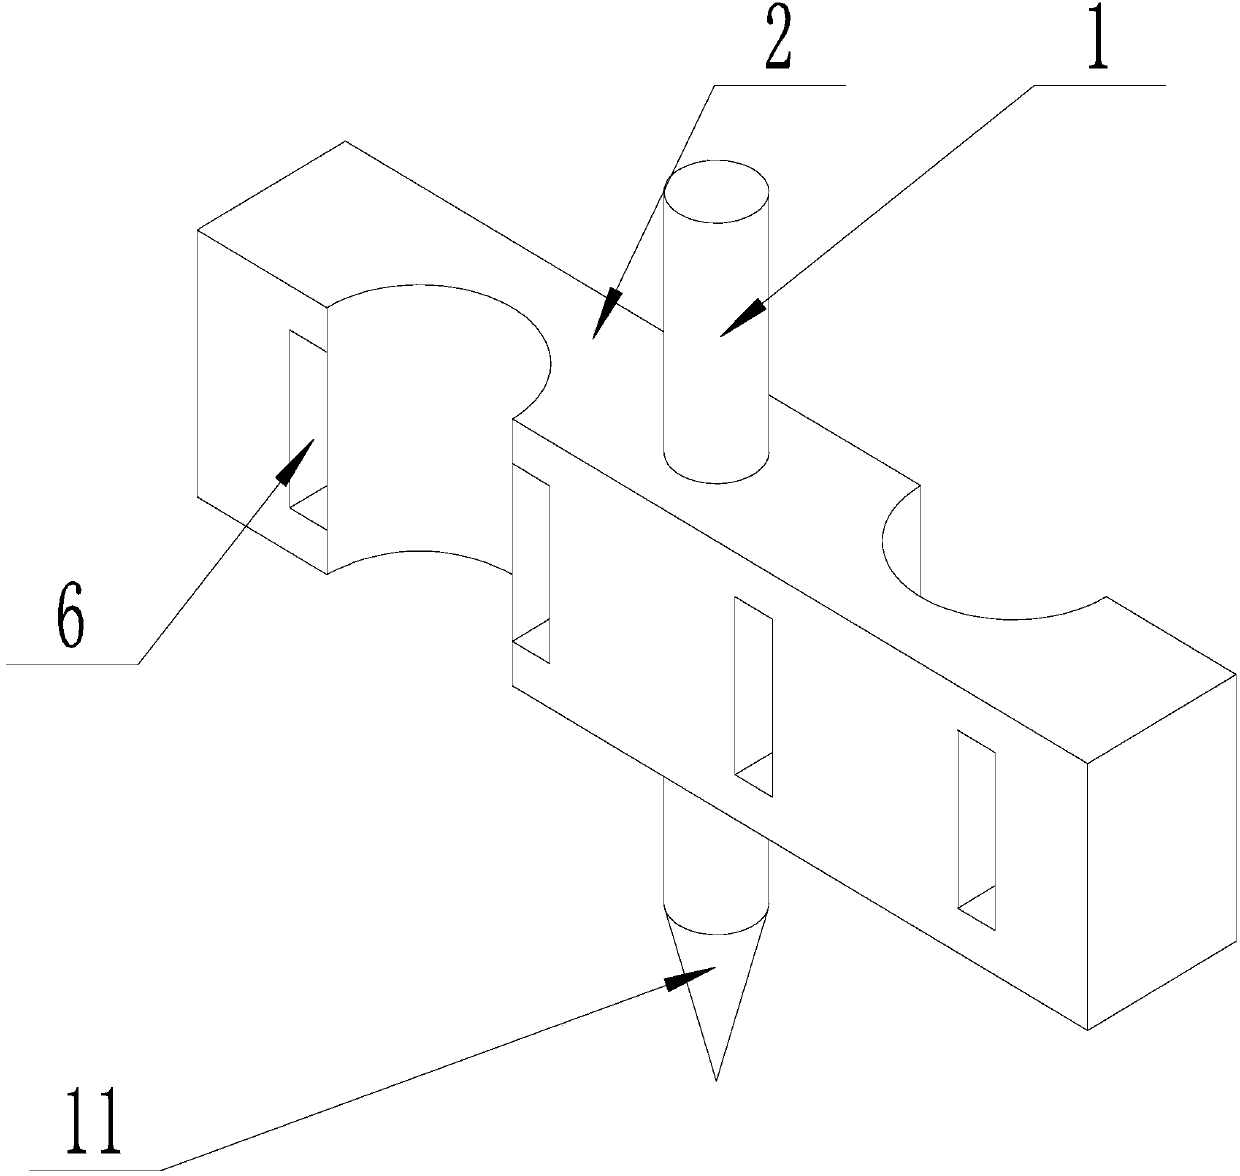 Supporting mechanism used for tomato vines